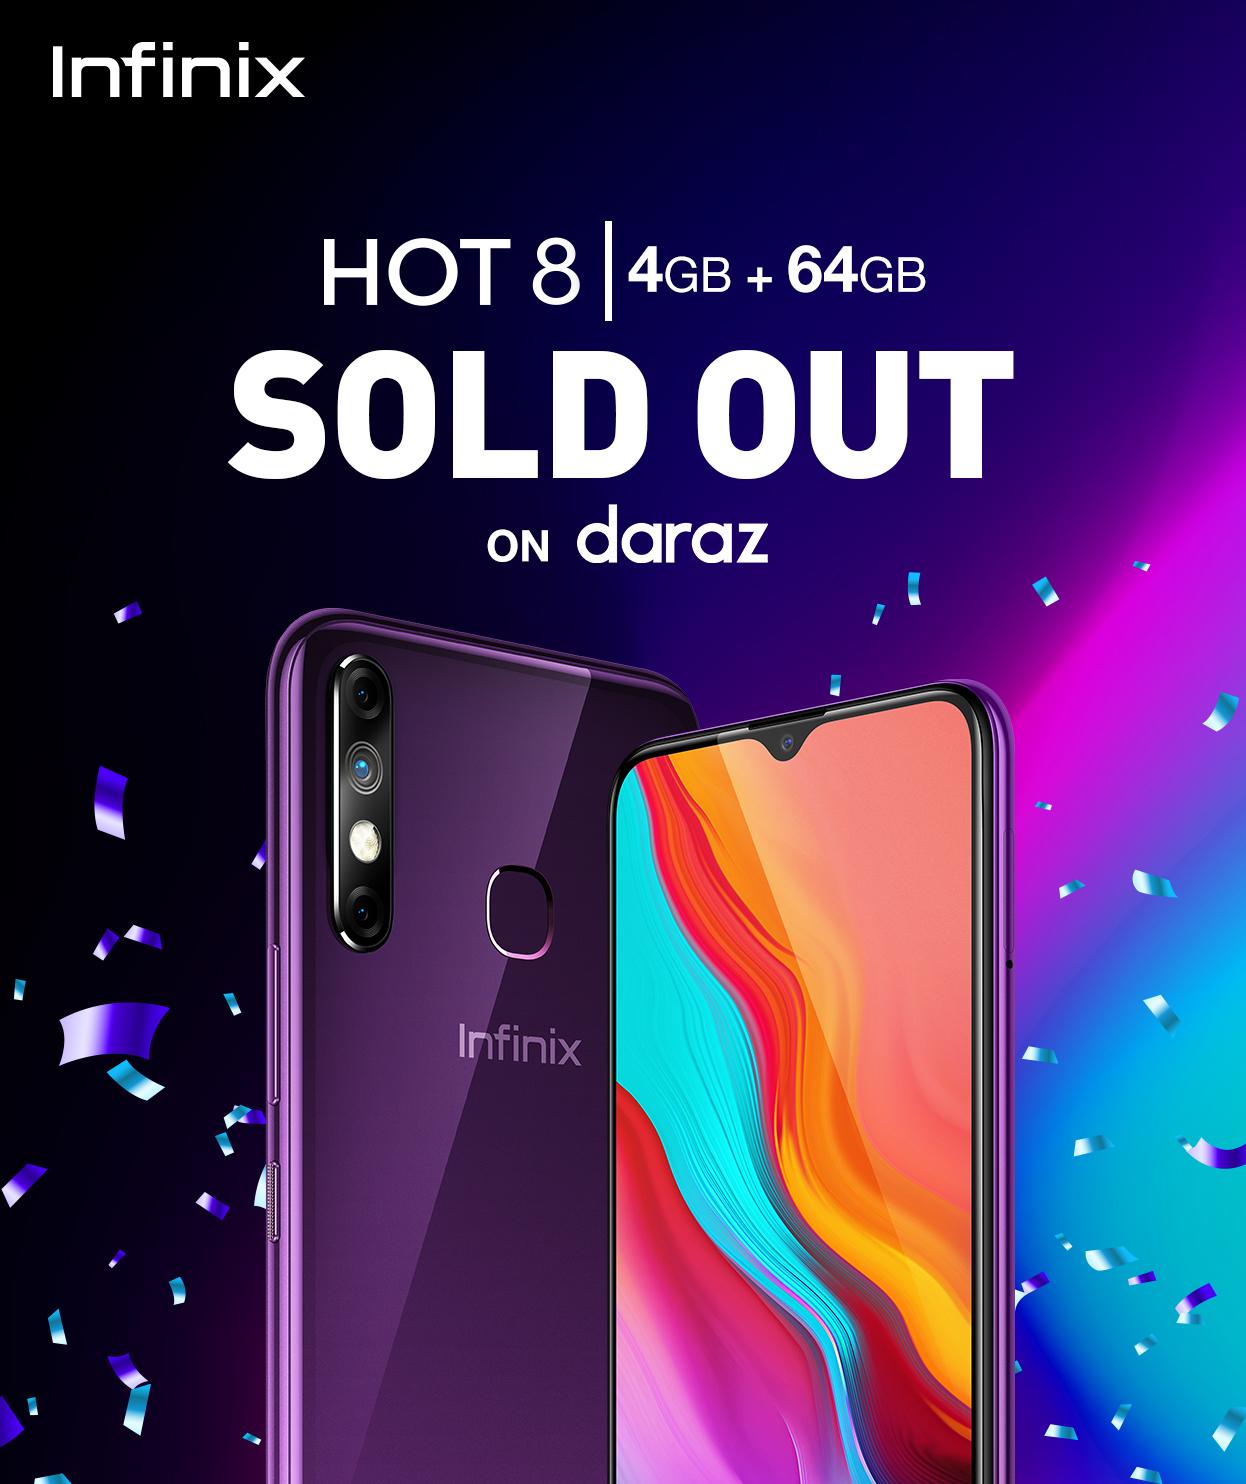 Infinix Hot 8 4+64GB with 5000mAh Battery Sold Out on daraz in just 3 hours!!!